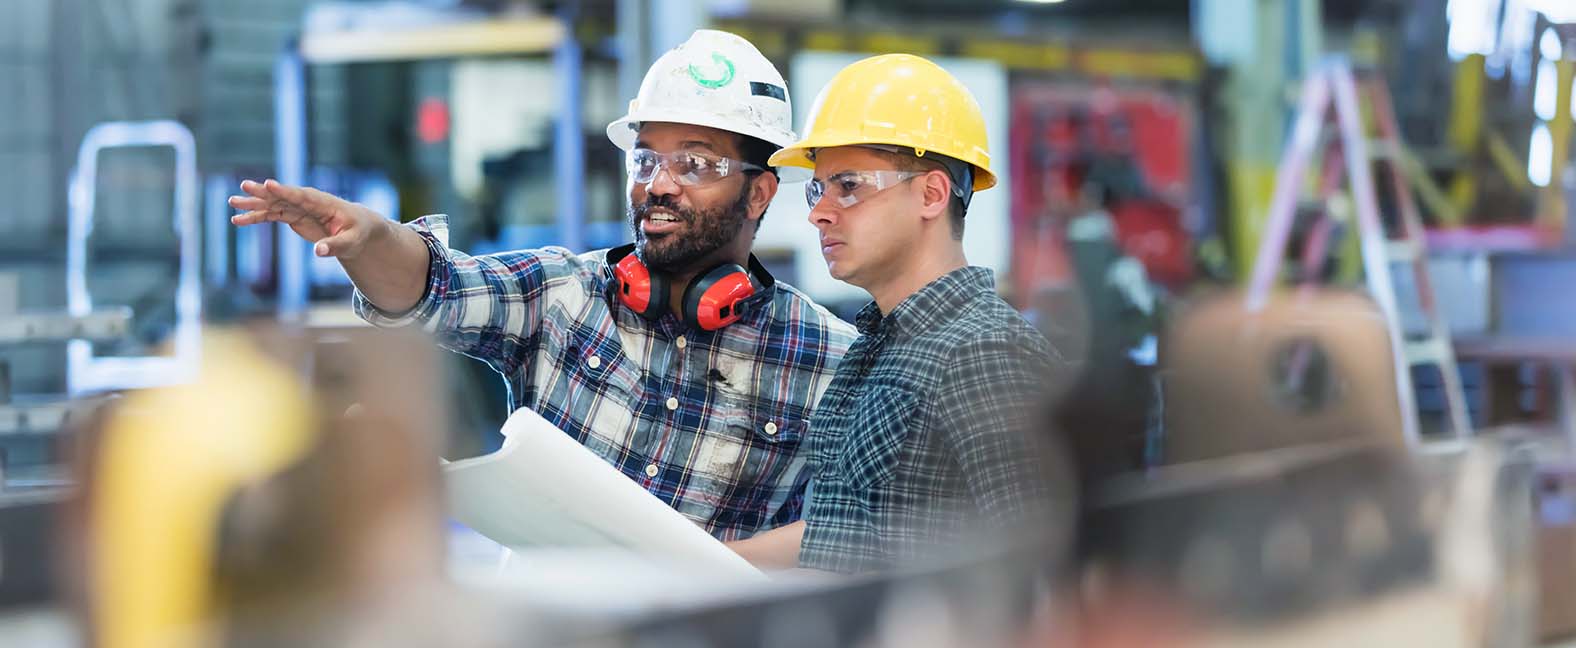 Two male workers wearing hard hats overlooking production in a manufacturing plant.